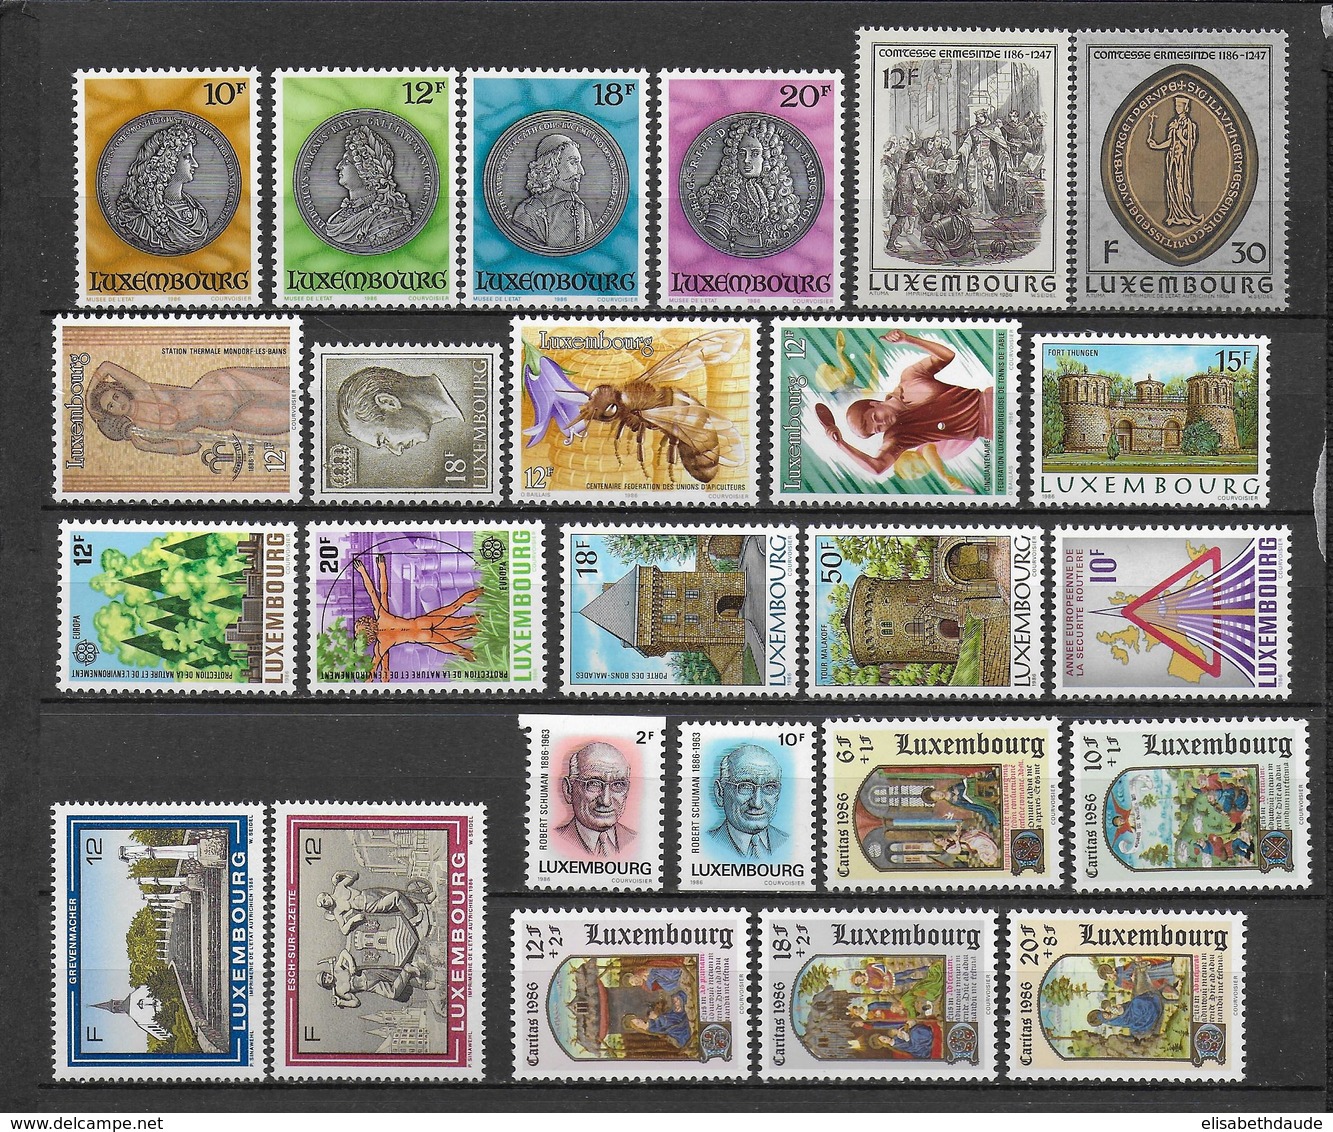 LUXEMBOURG - ANNEE COMPLETE 1986 ** MNH - - Années Complètes